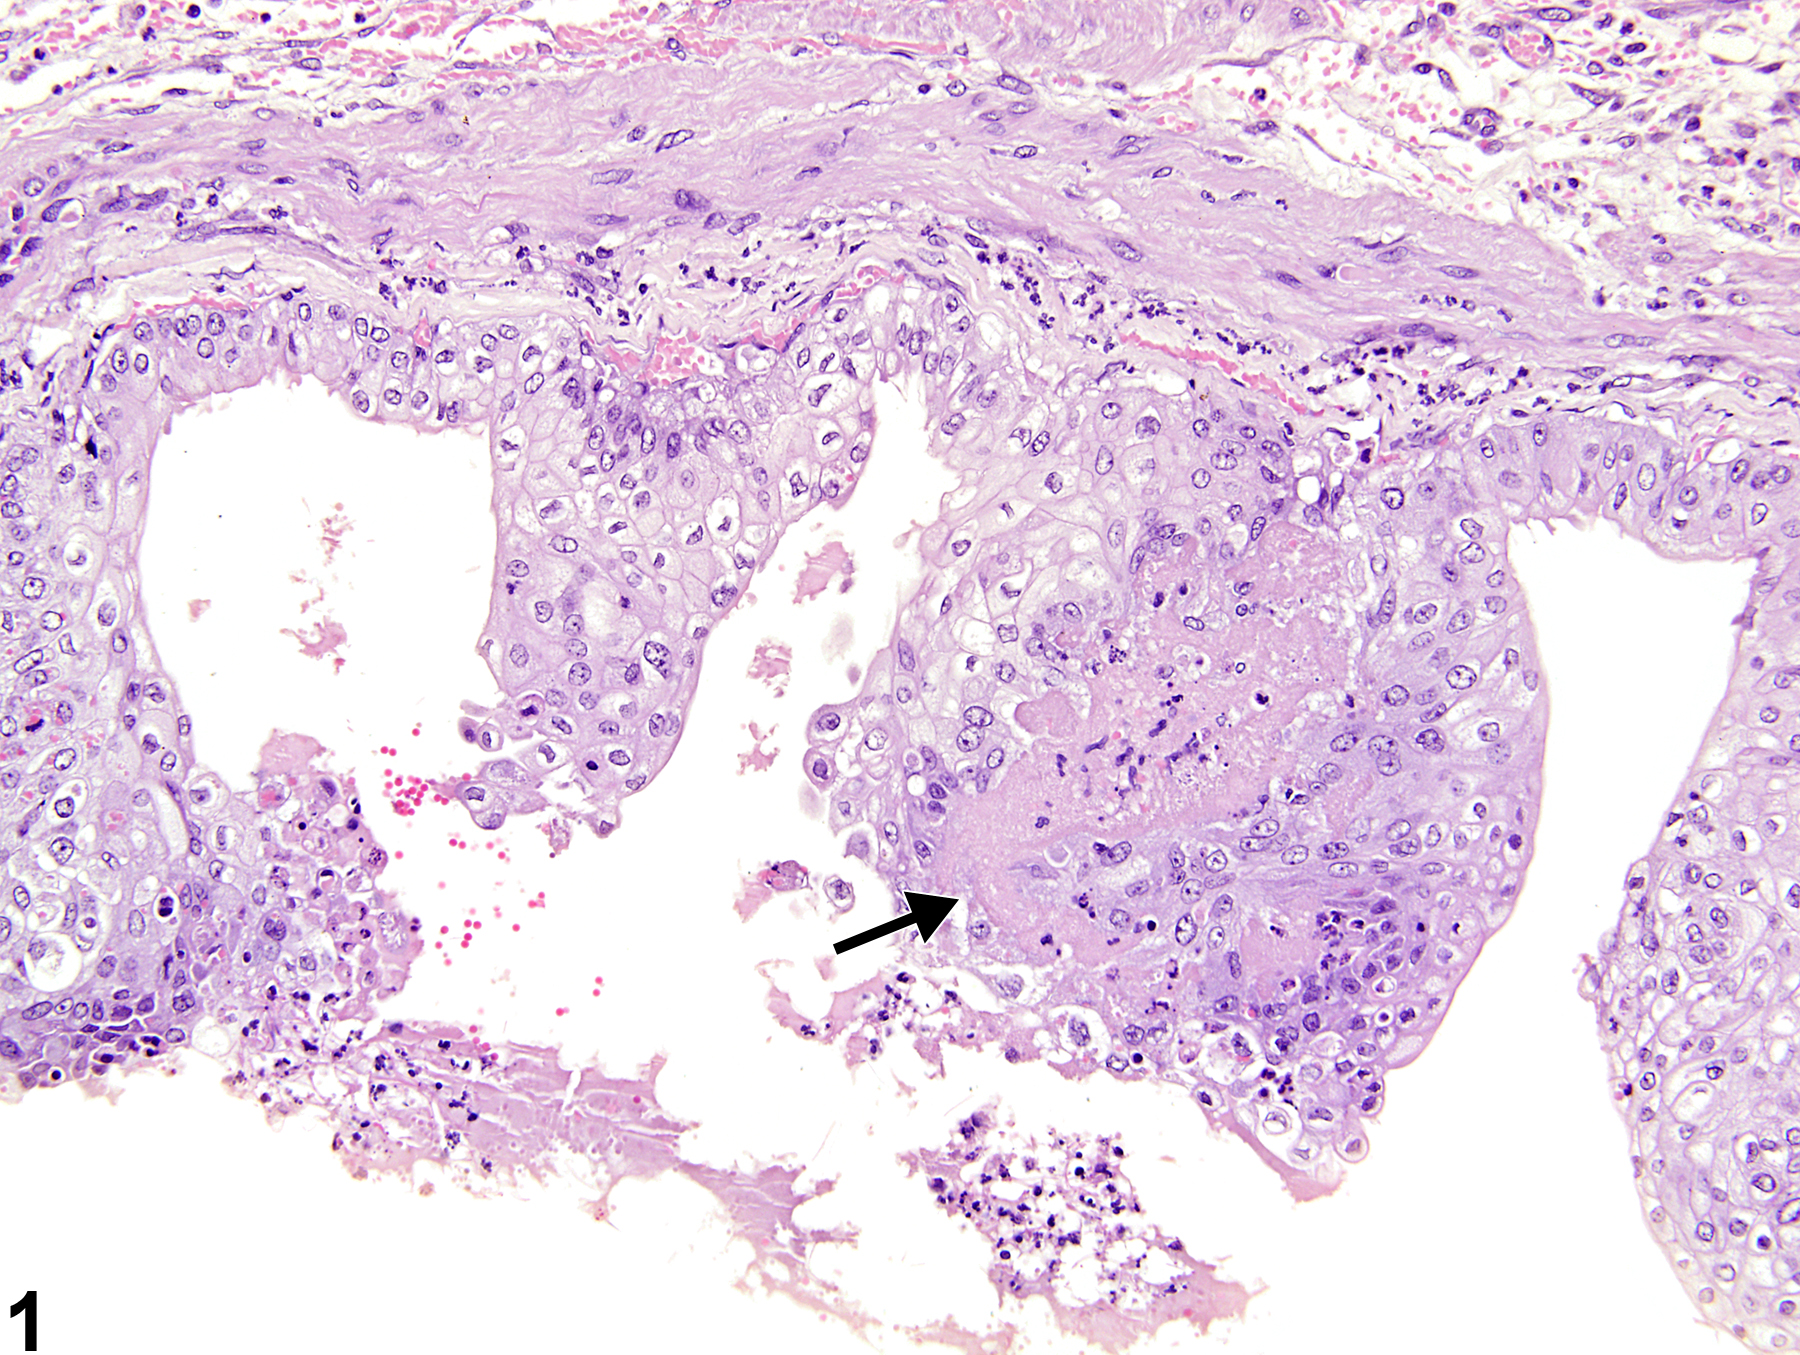 Image of necrosis in the urinary bladder from a male F344/N rat in a chronic study